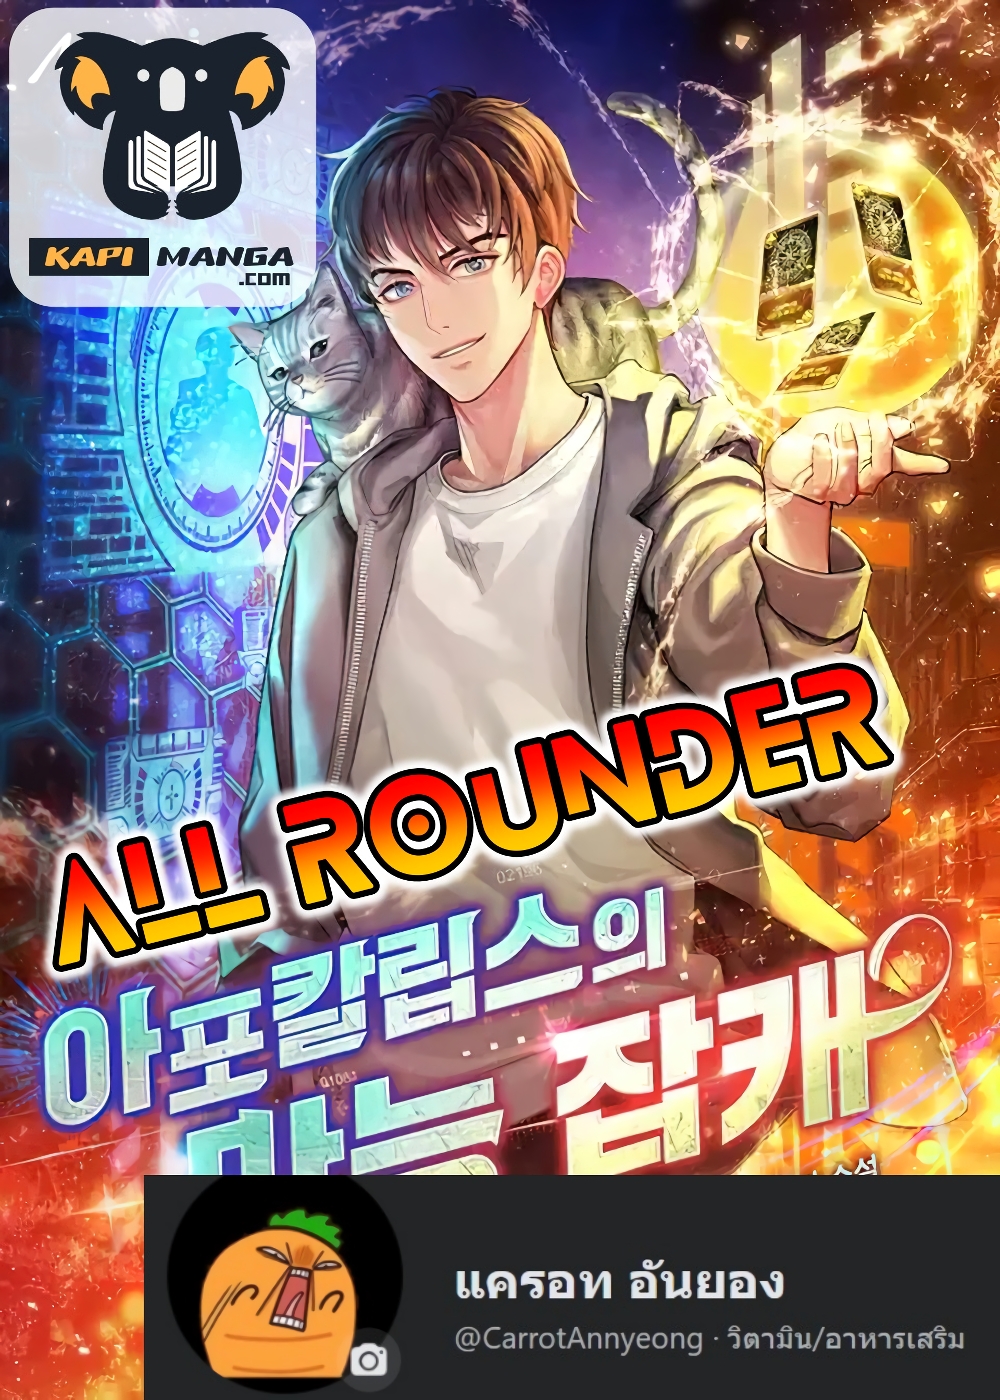 All Rounder14 (1)